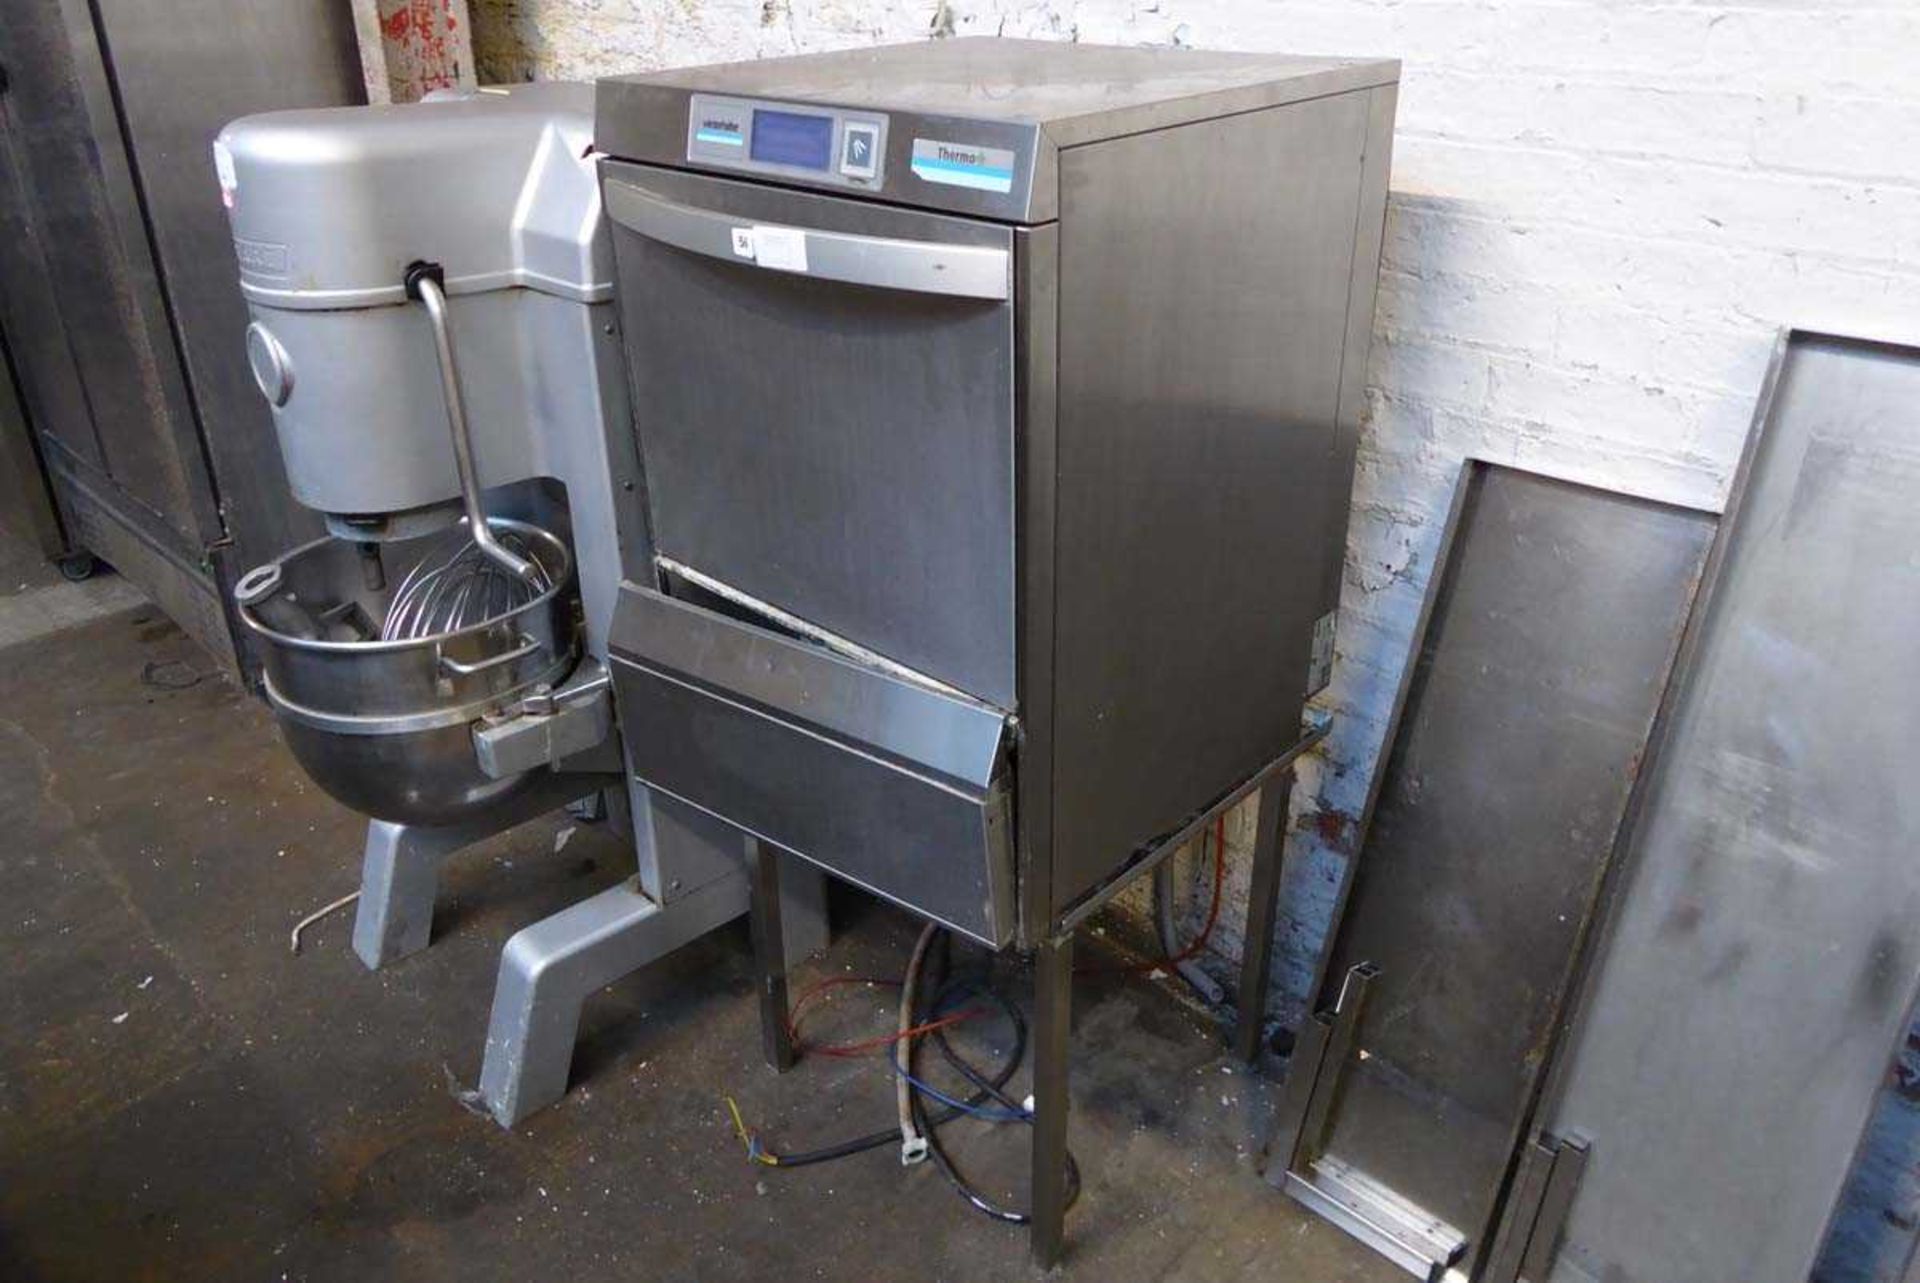 +VAT 60cm Winterhalter thermo+ drop front washer on stand